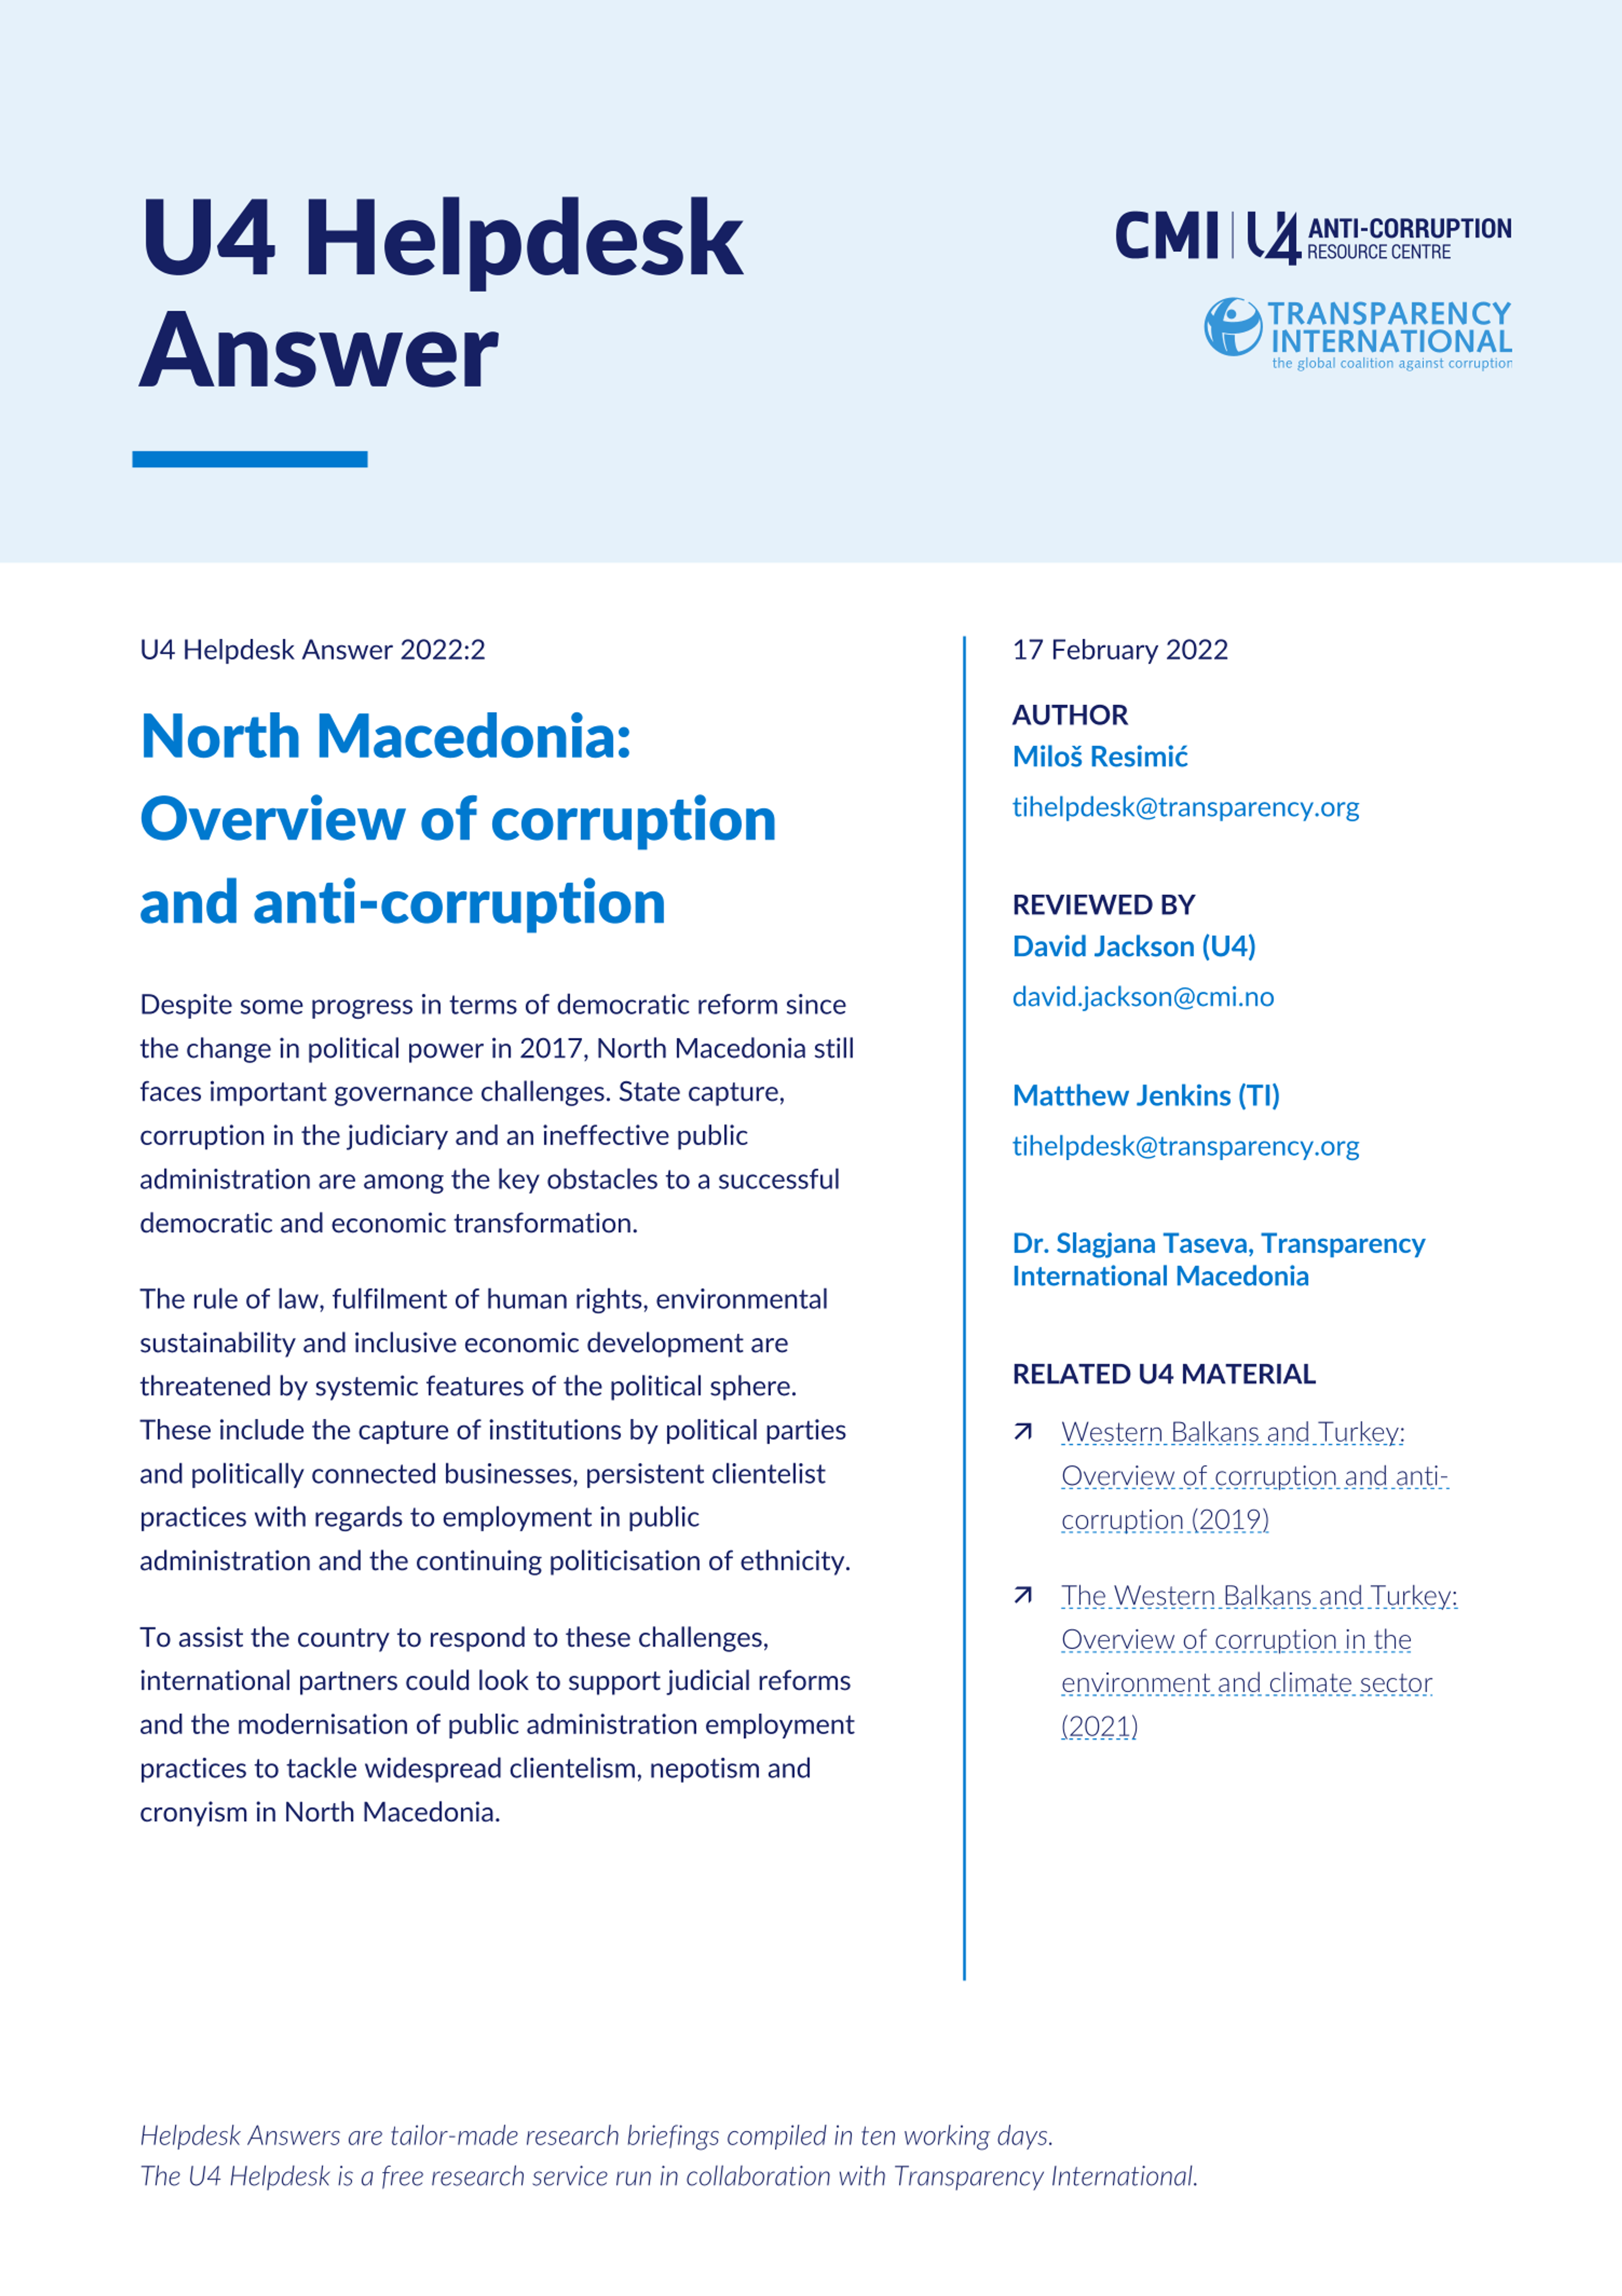 North Macedonia: Overview of corruption and anti-corruption